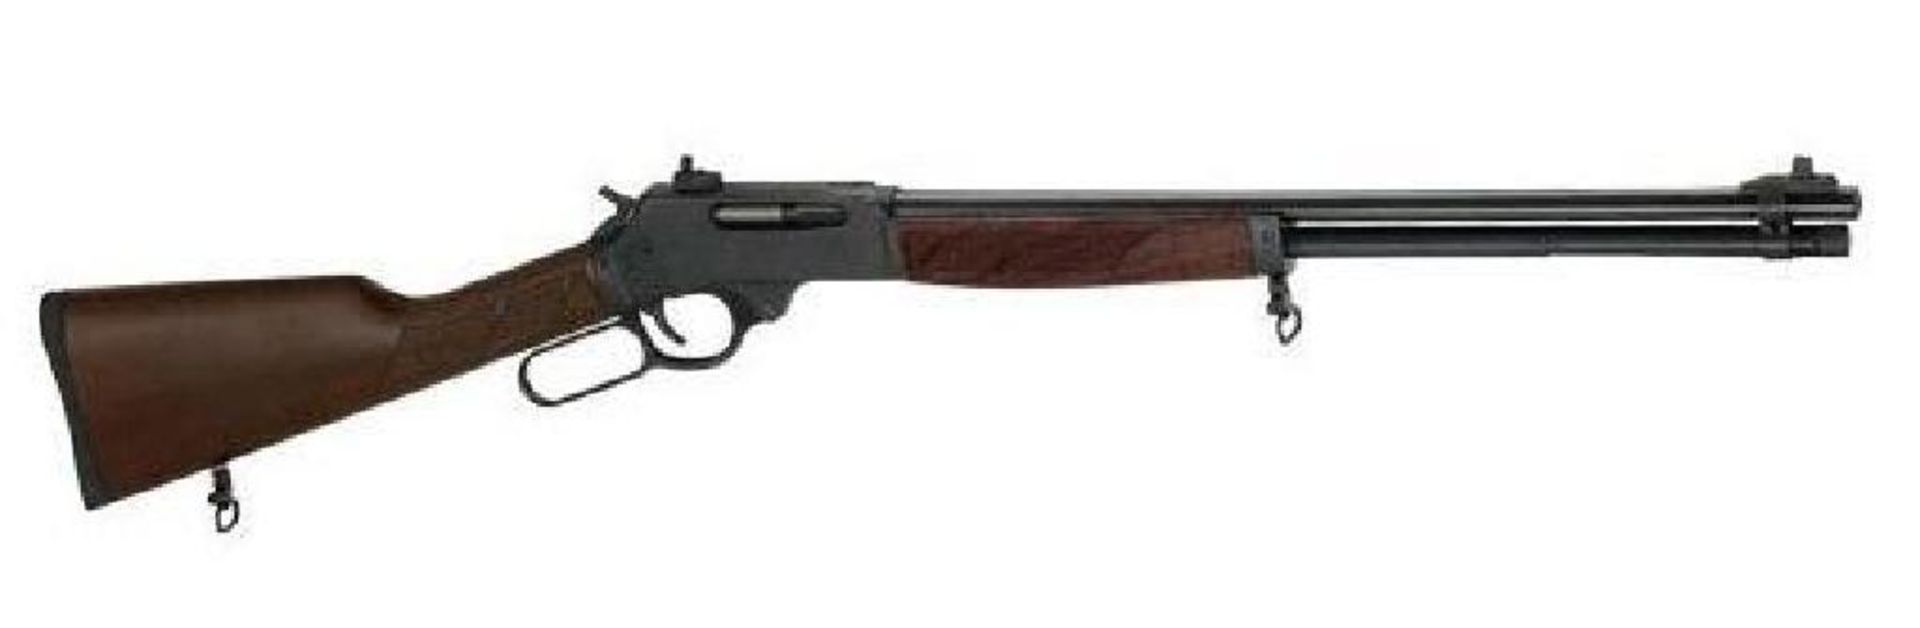 *NEW* Henry Repeating Arms Lever Action Rifle 30-30 Win 20" 5+1 American Walnut Stk 619835090003